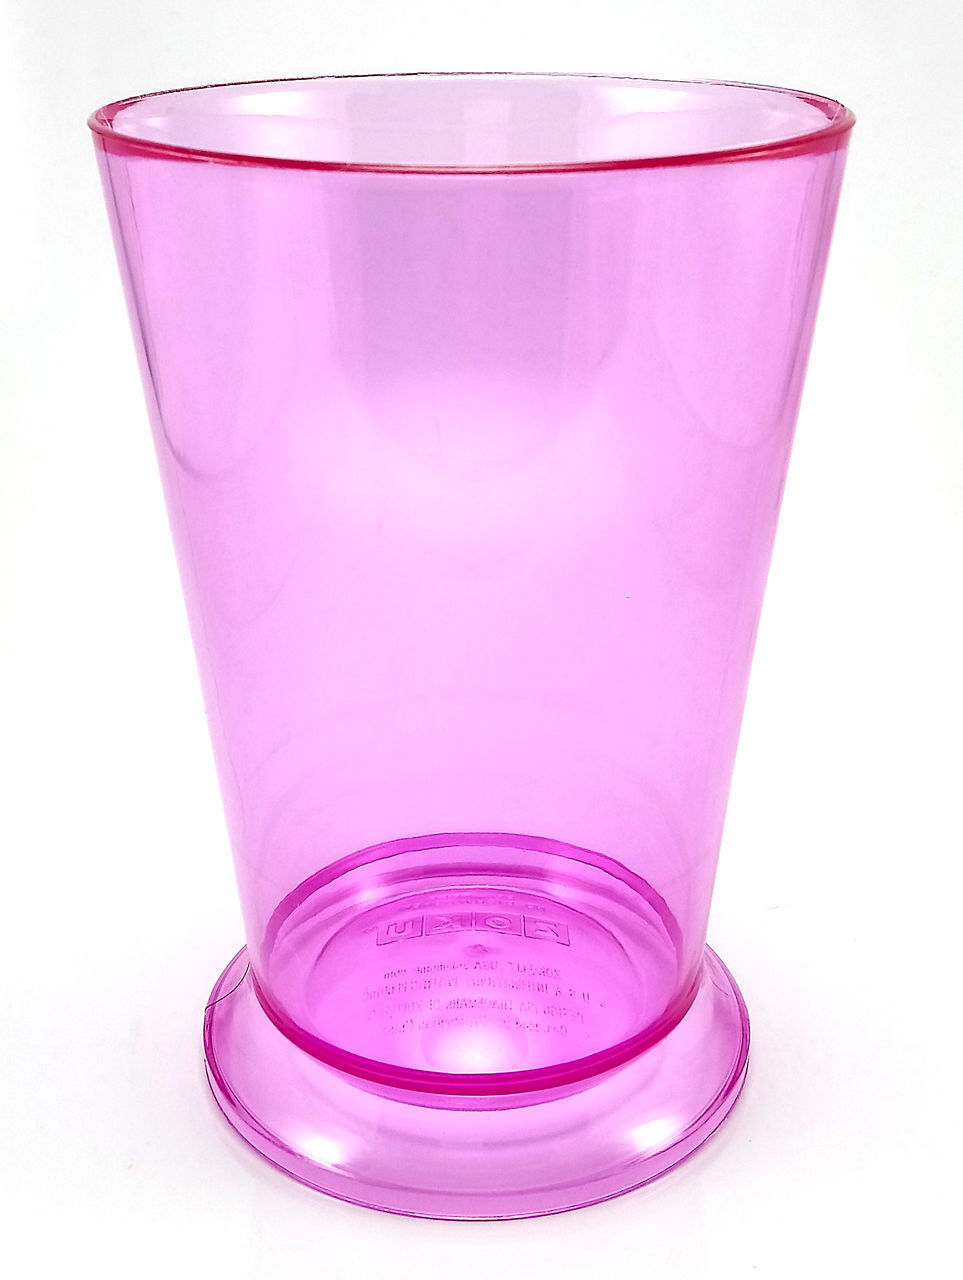 CLOSE-UP OF GLASS OF PINK WATER